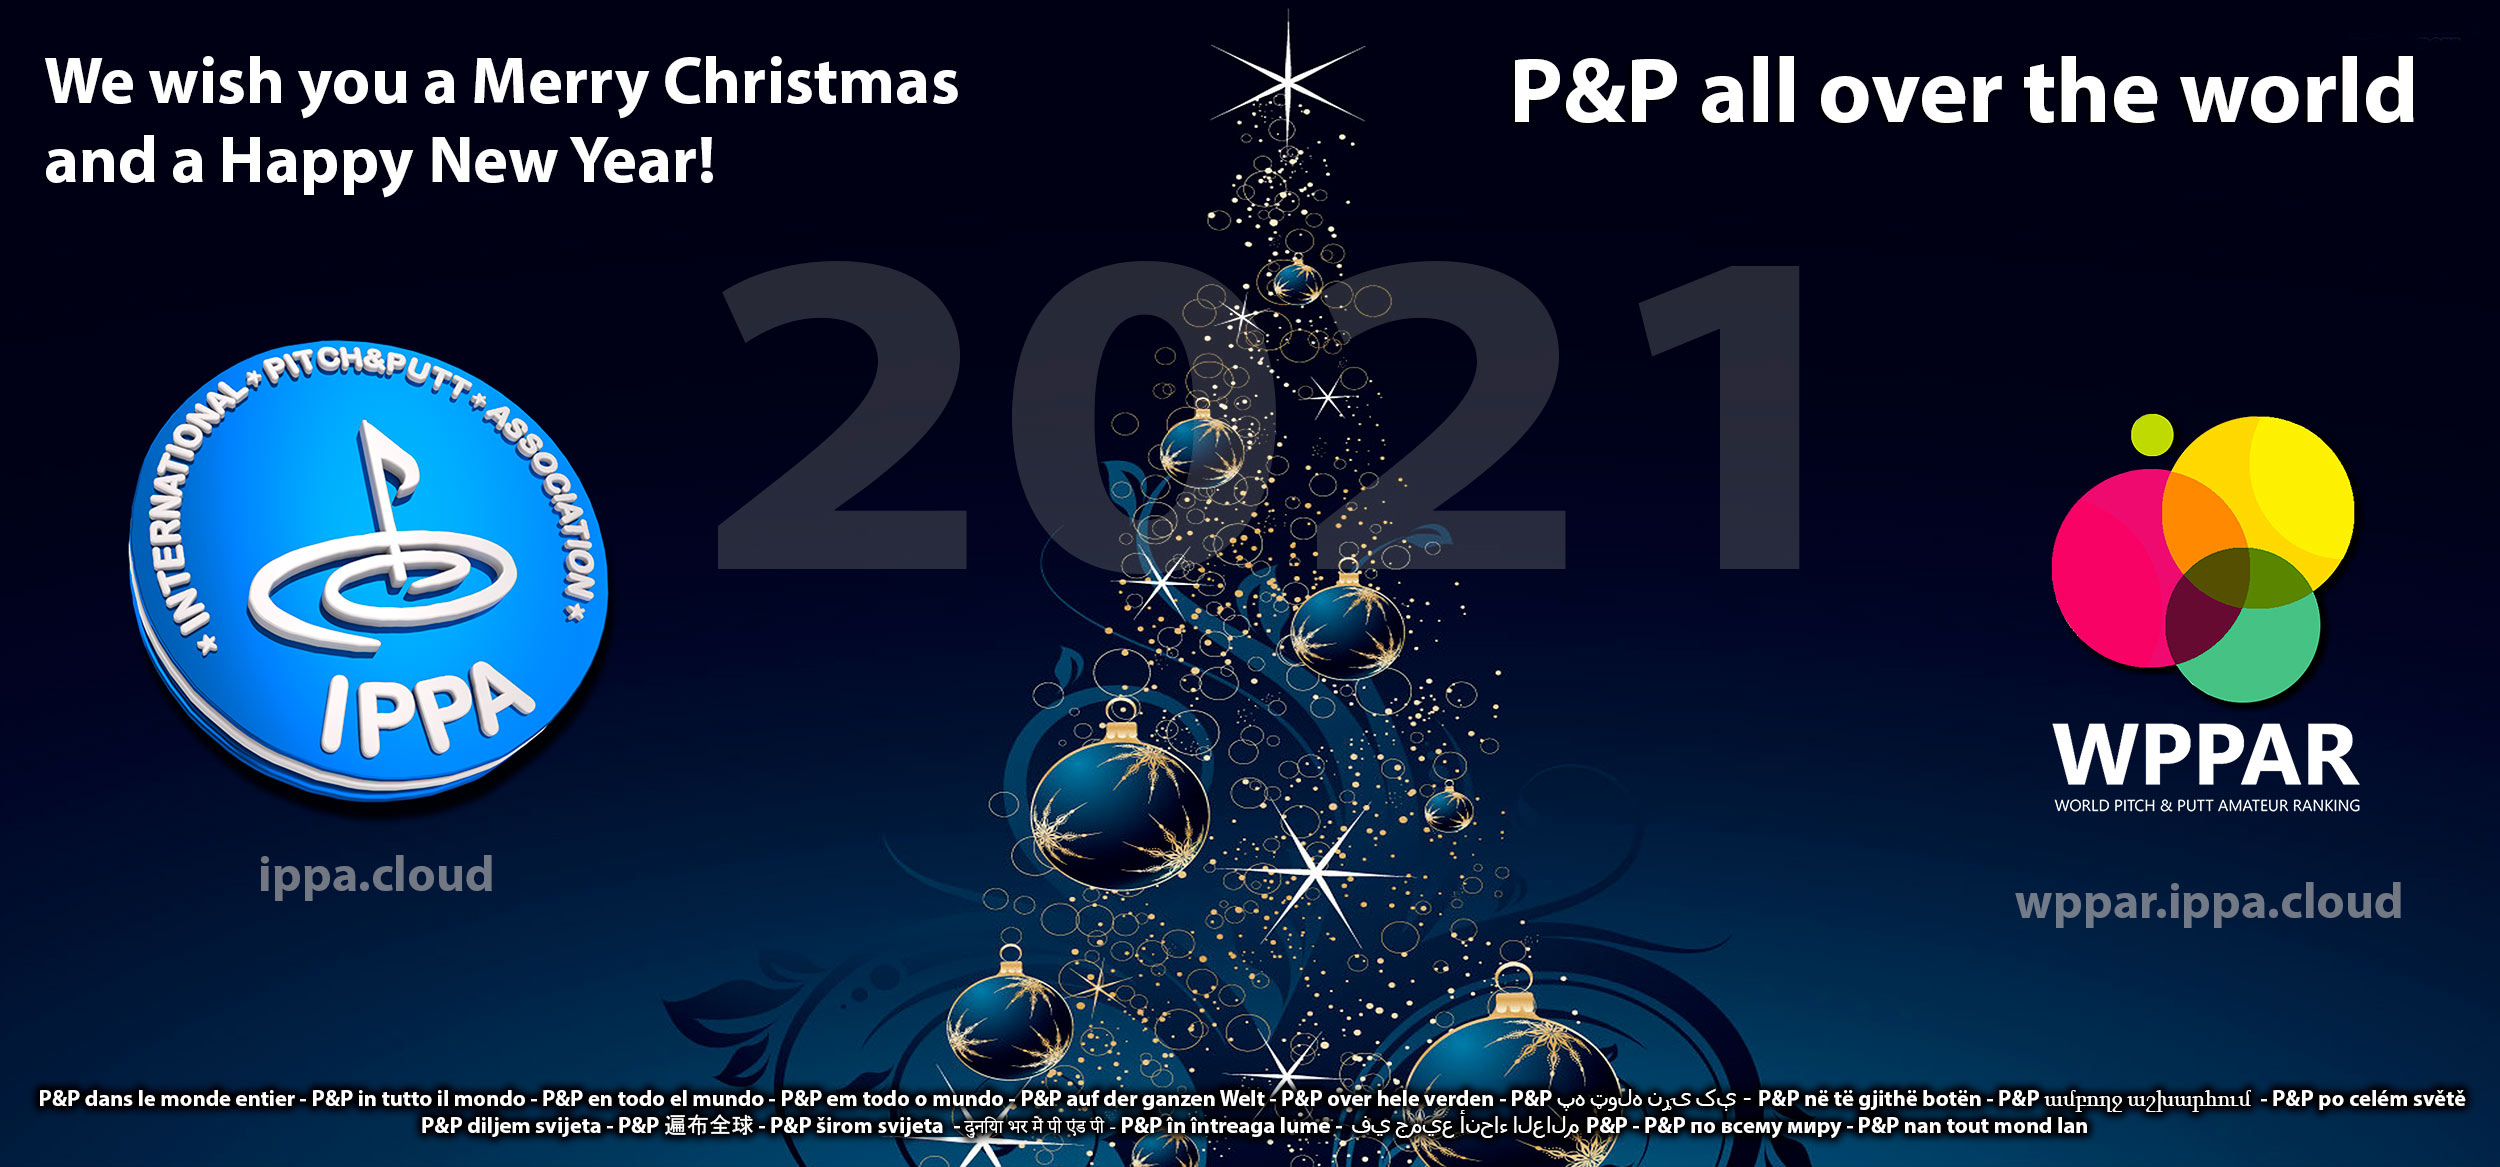 We wish you a Merry Christmas and a Happy New Year!